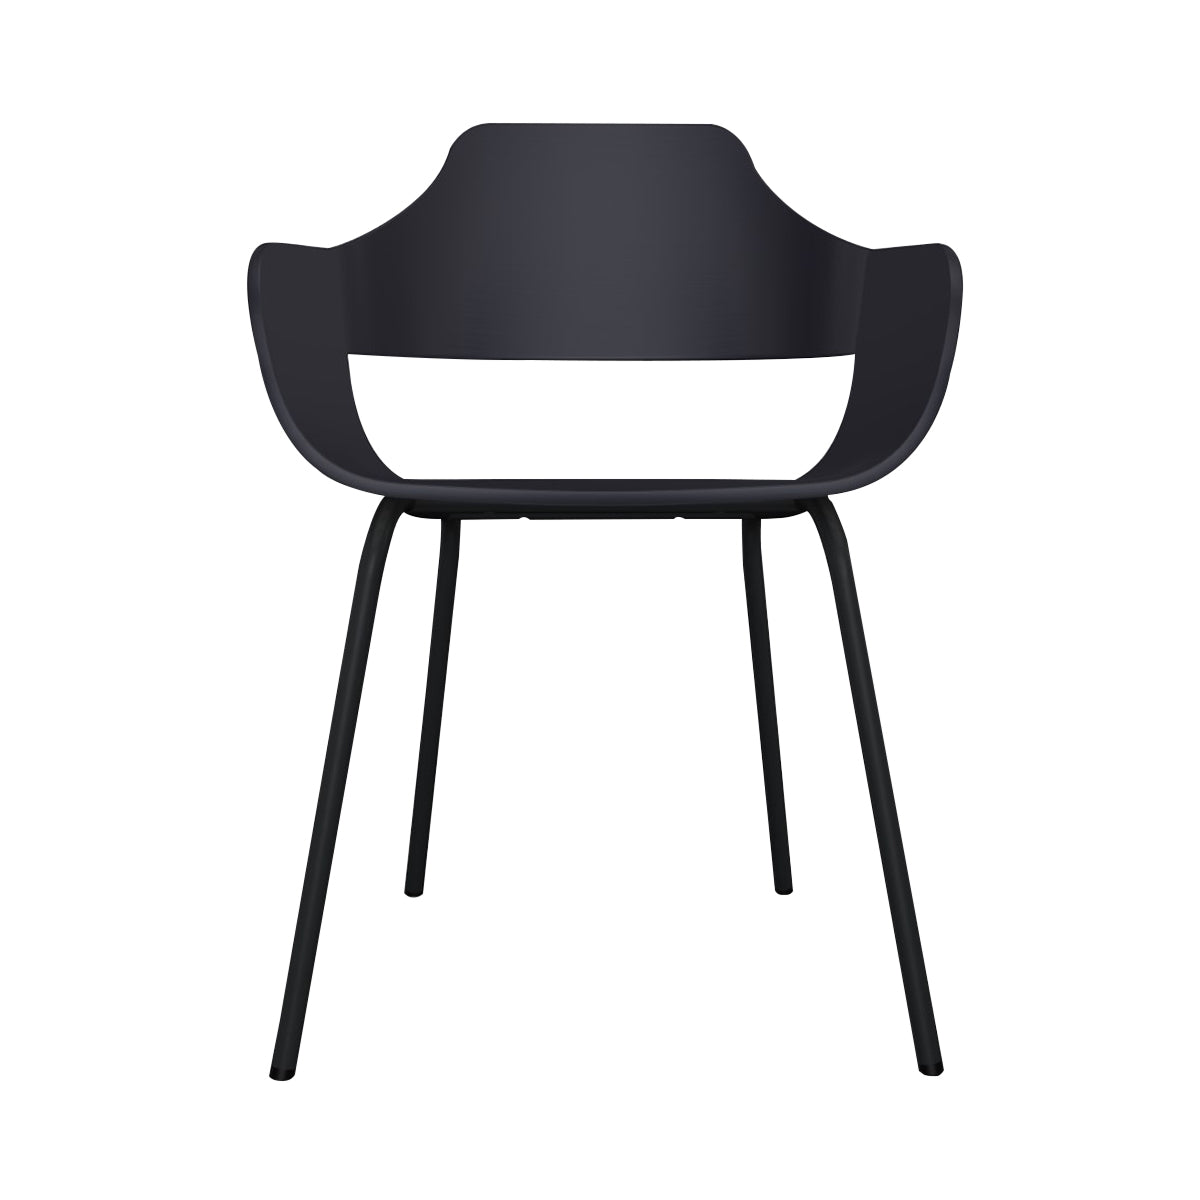 Showtime Chair with Metal Base: Lacquered Black + Anthracite Grey